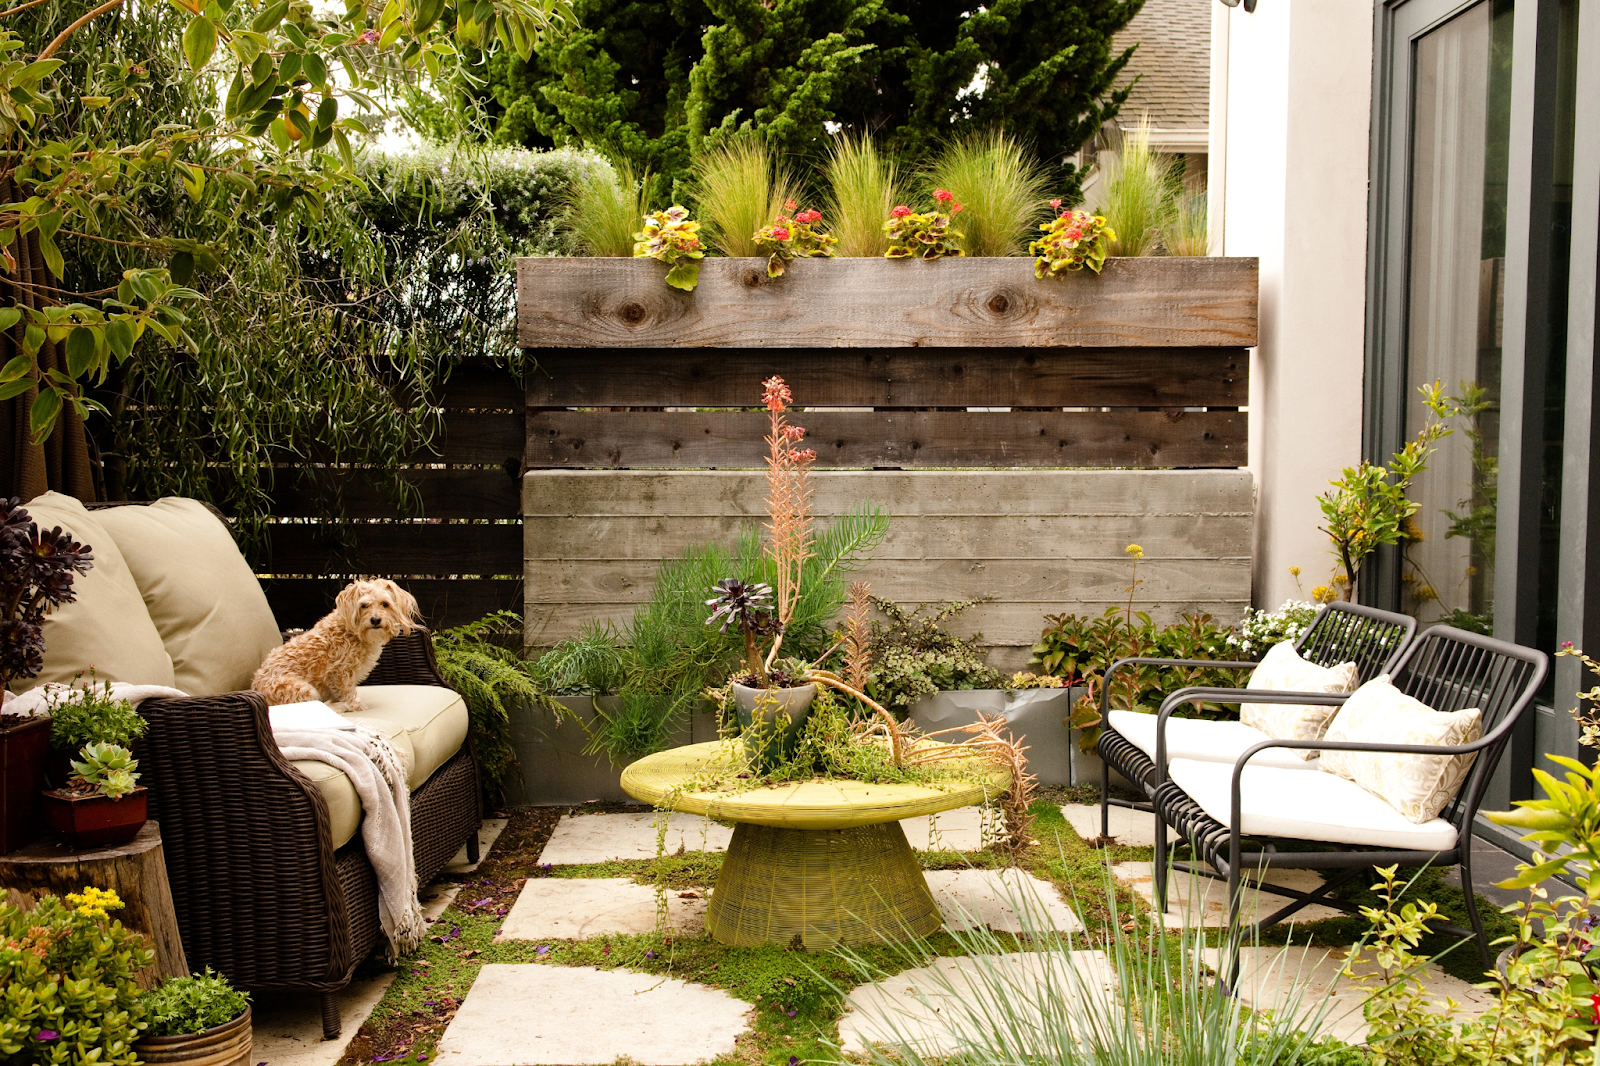 Welcoming outdoor space filled with plants and greenery